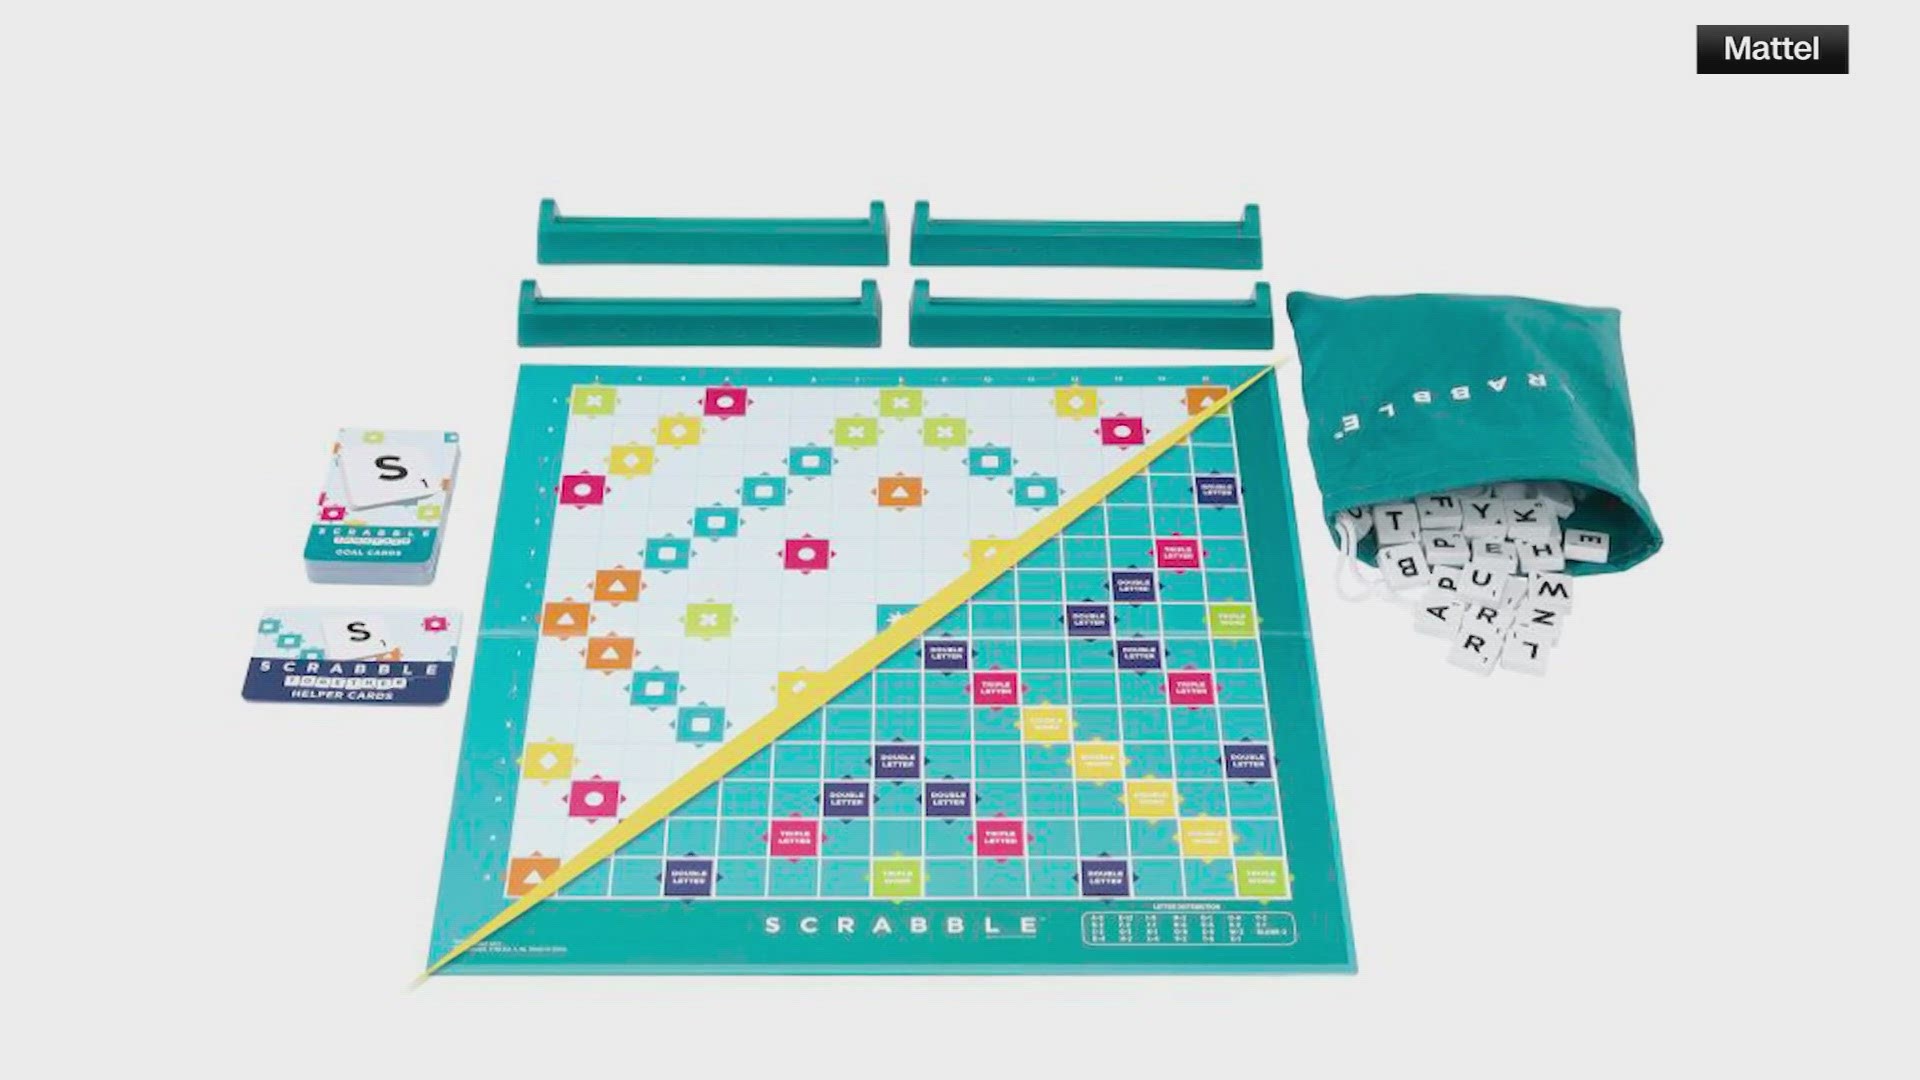 What do you think of the new Scrabble Together game?